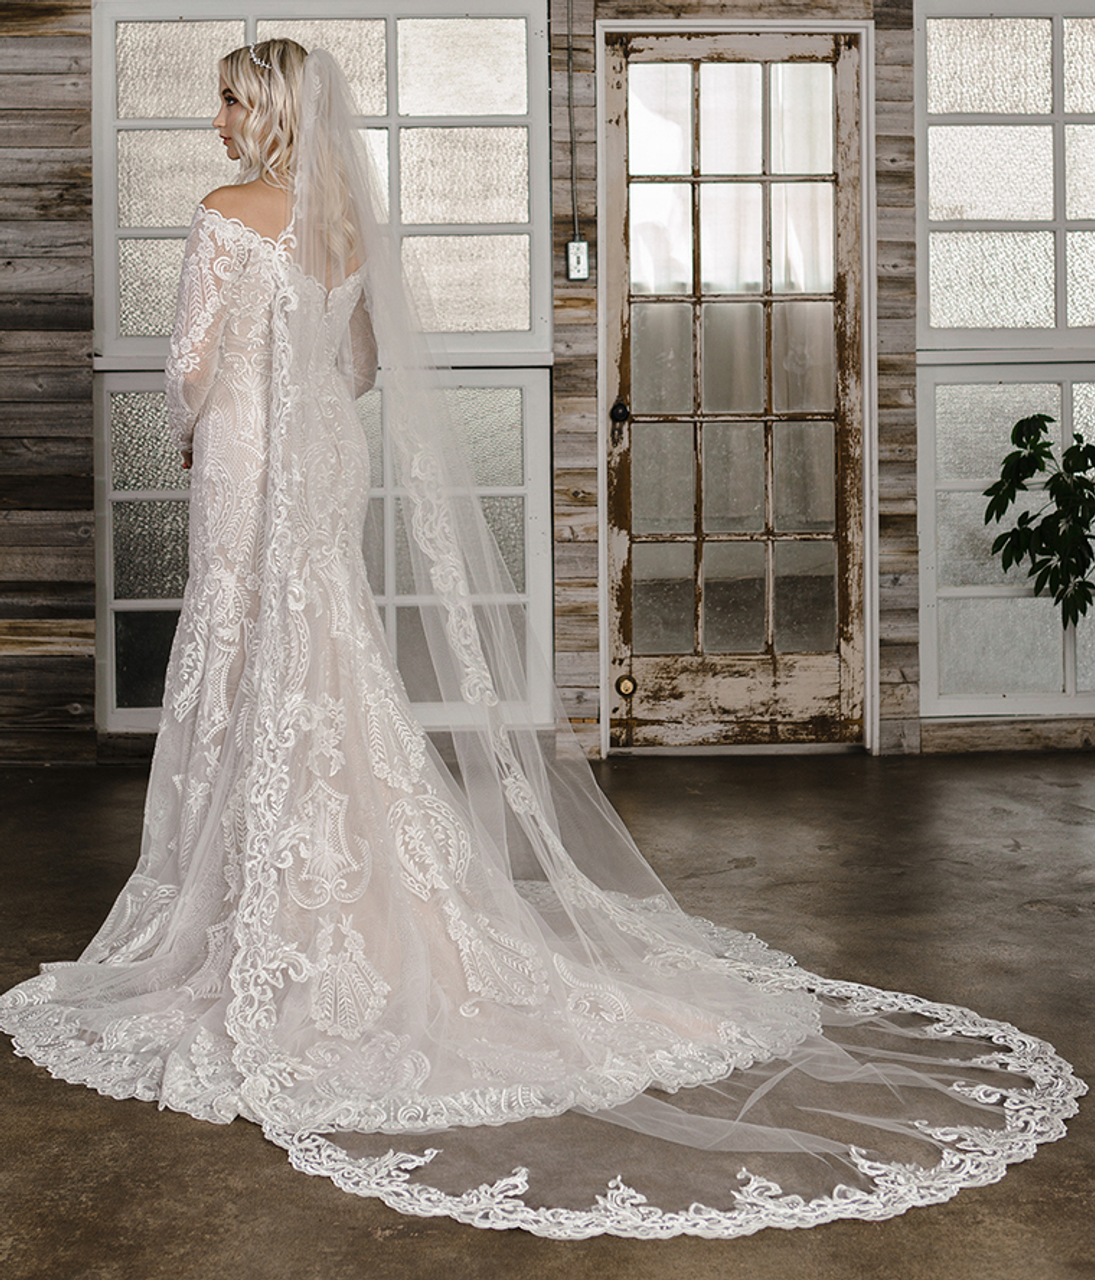 https://cdn11.bigcommerce.com/s-zb3qt33o/images/stencil/1280x1280/products/18767/60736/Stunning-Lace-Cathedral-Wedding-Veil-enVogue-V2199C_45357__58382.1690398232.png?c=2